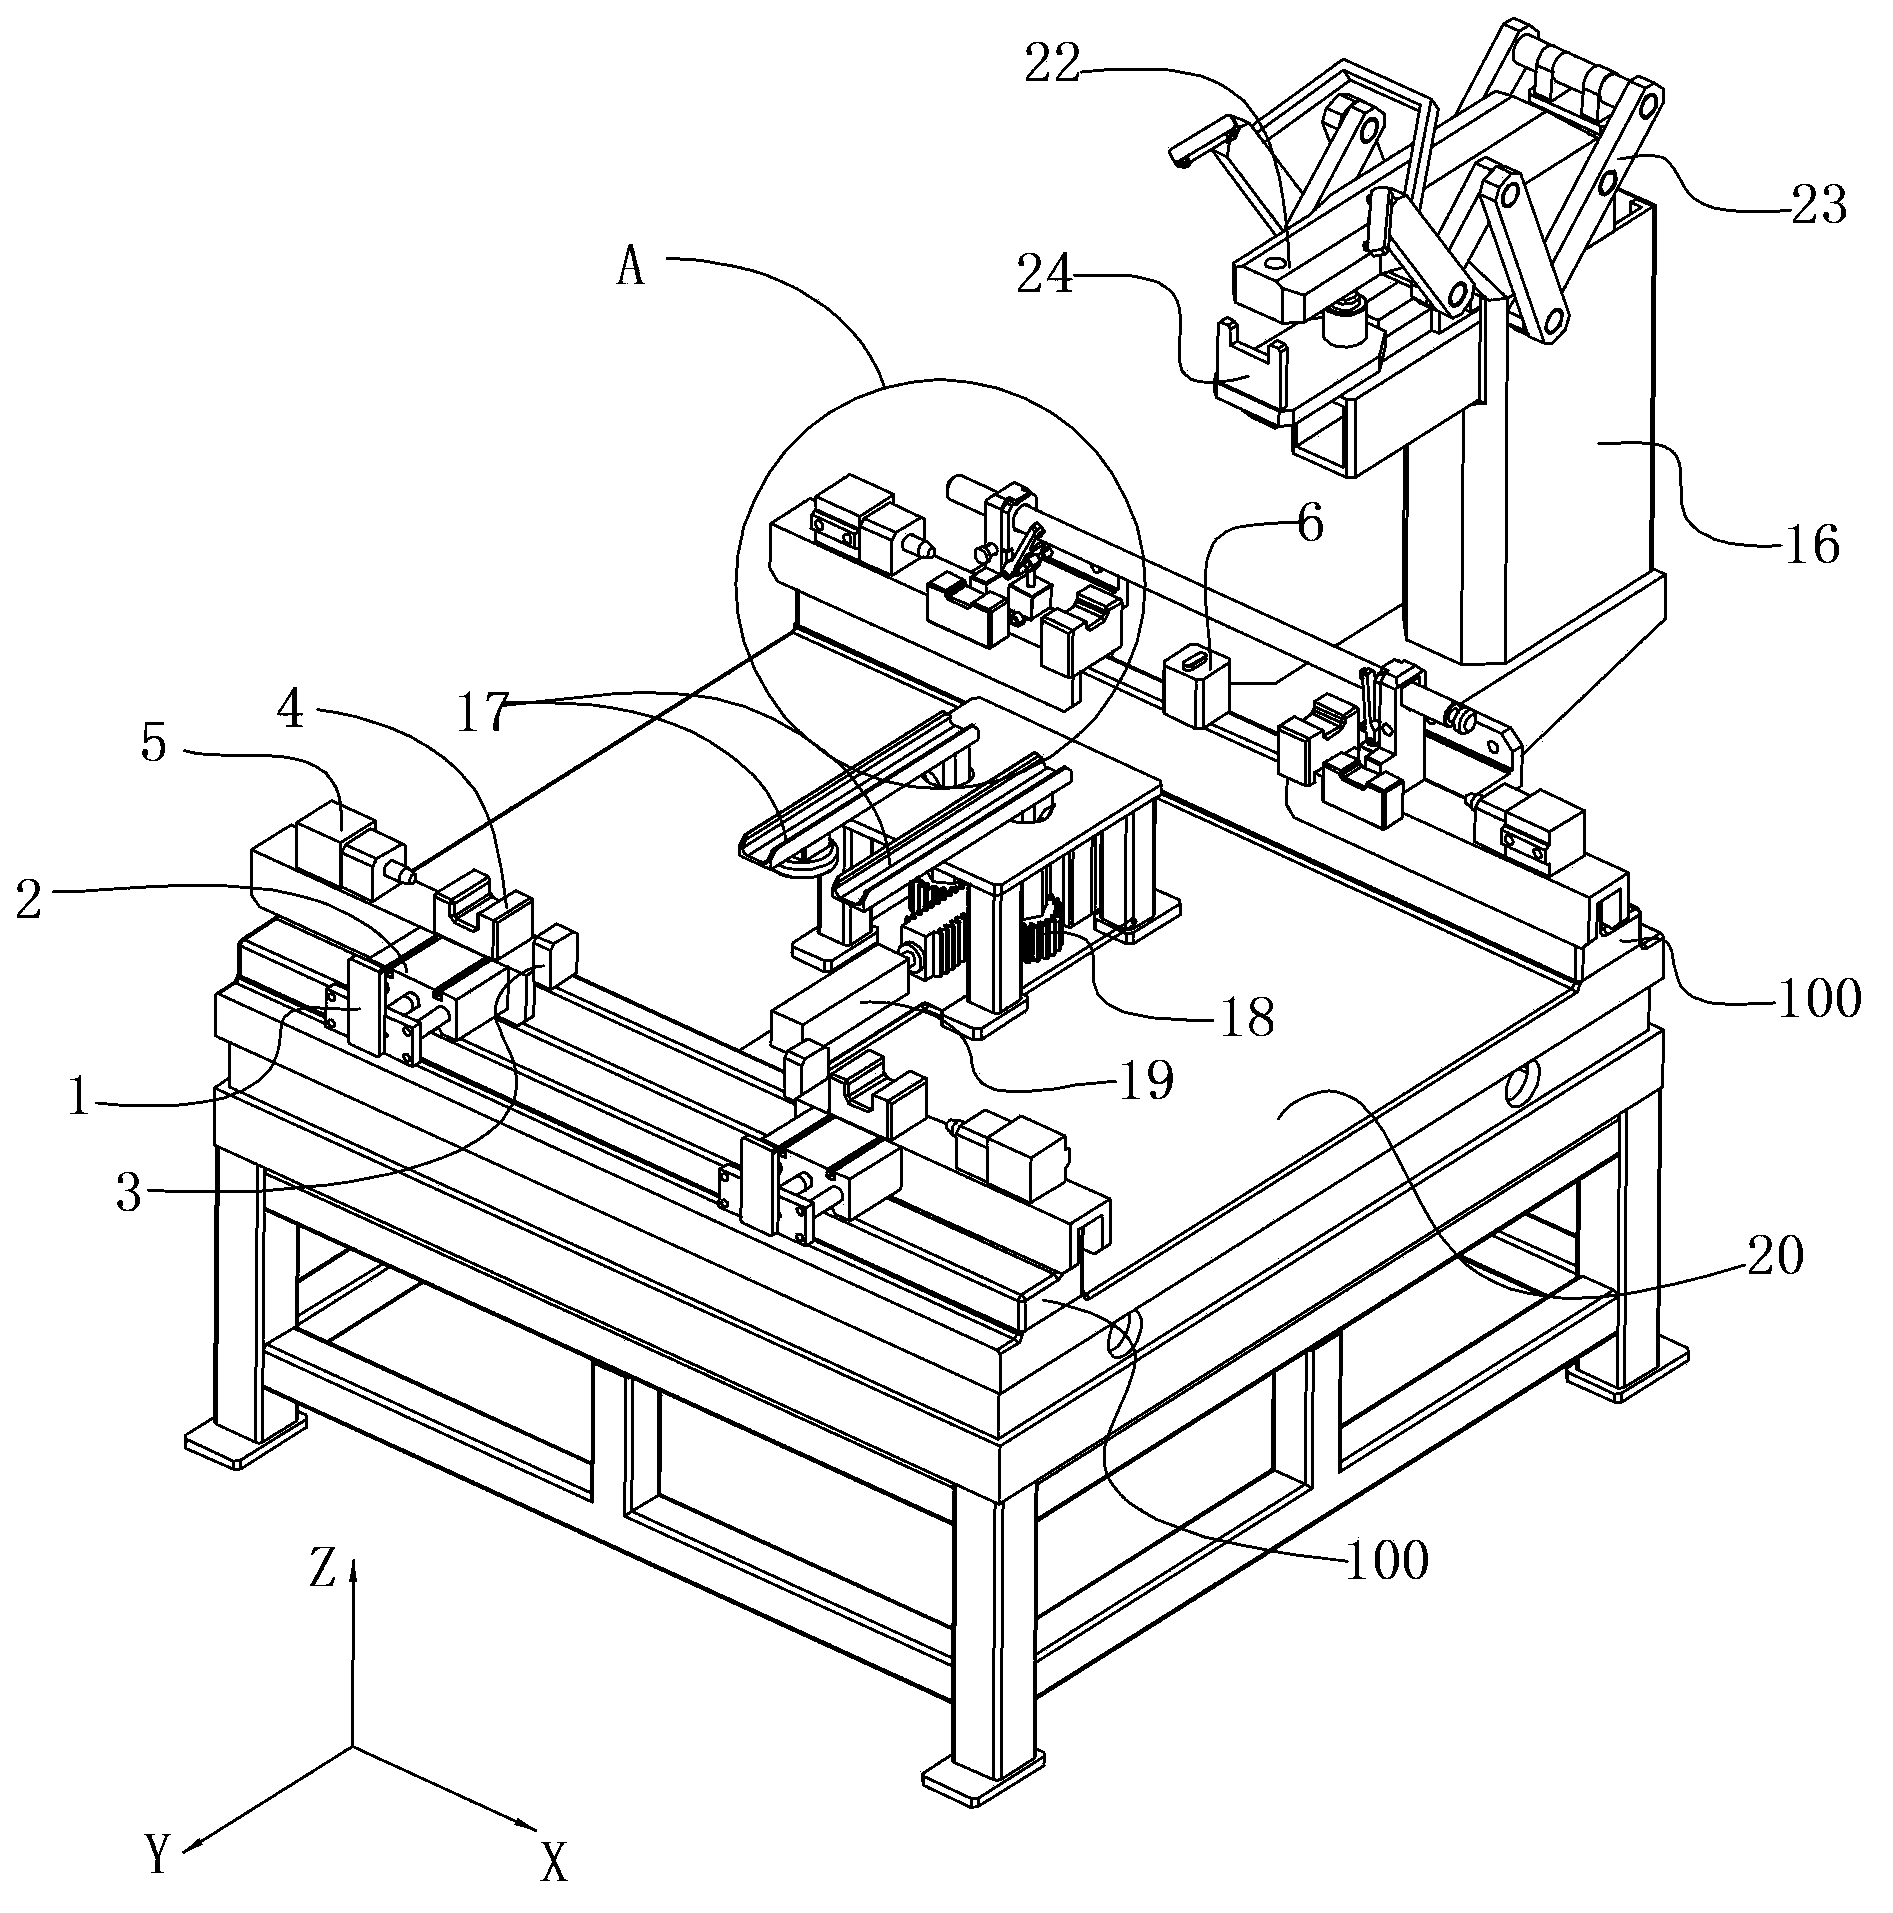 Manual tray carriage welding device